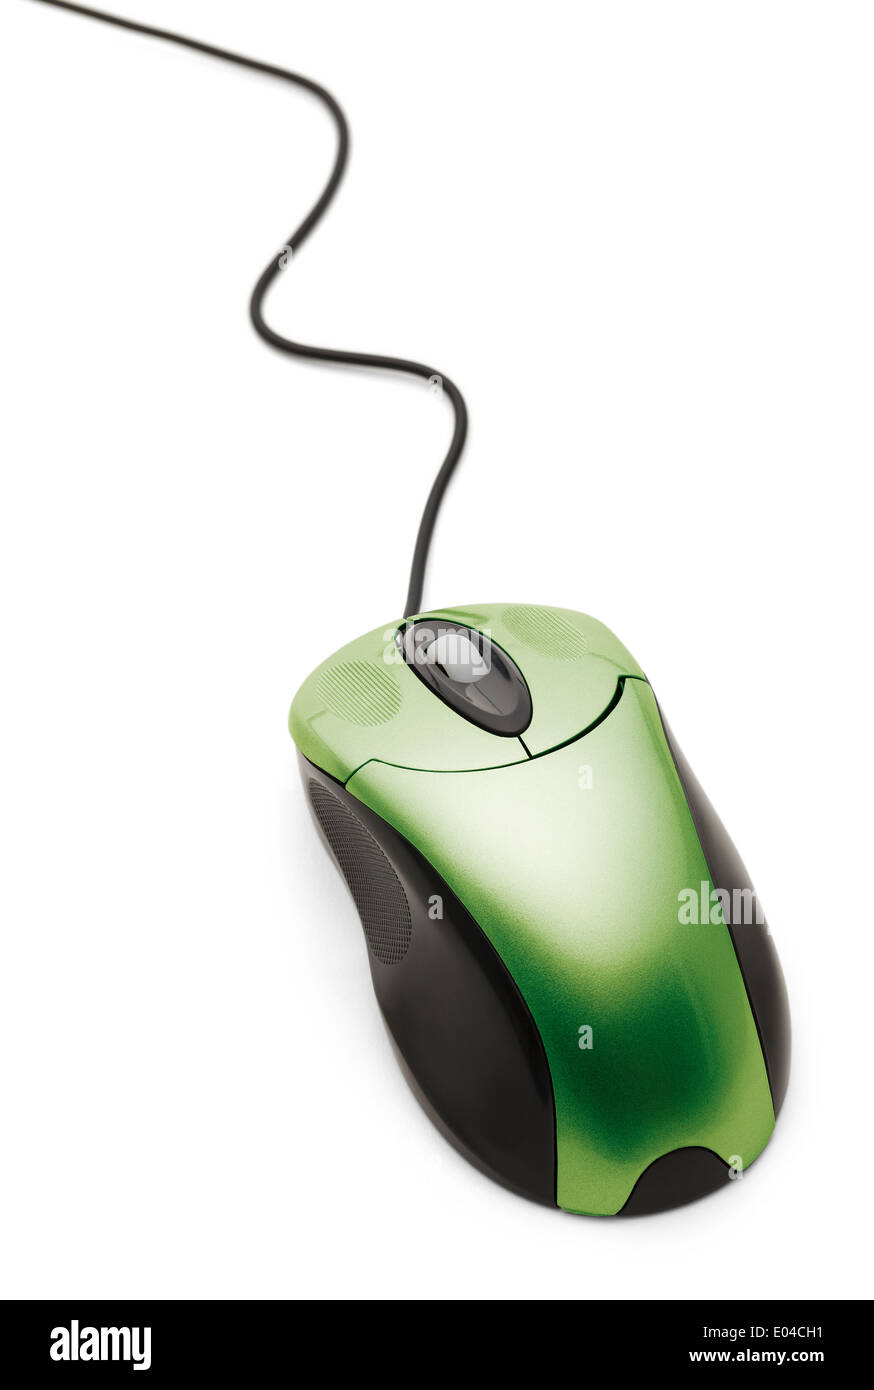 Computer Mouse With Cord Isolated on White Background. Stock Photo